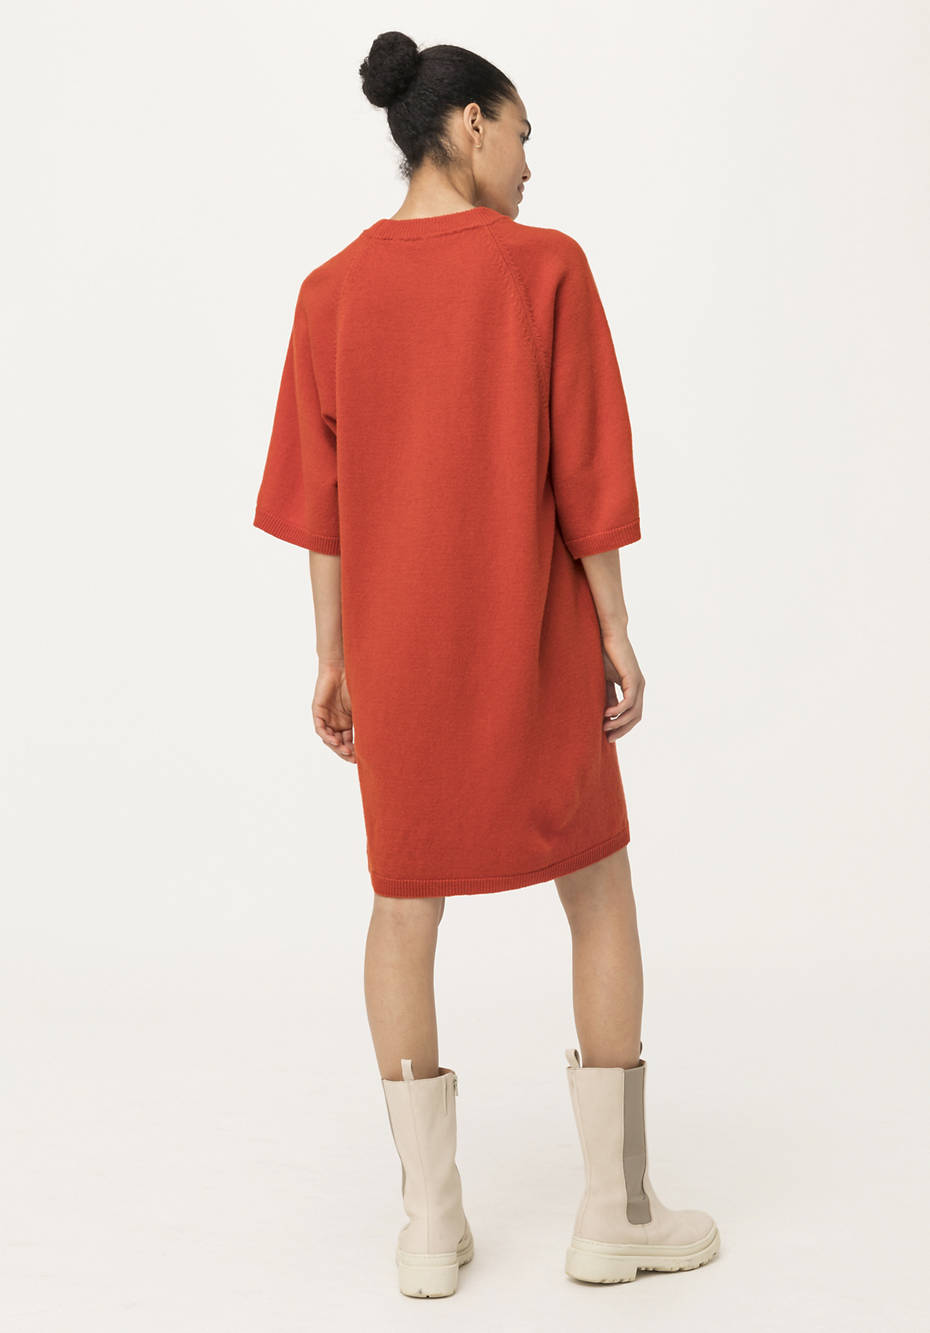 Knitted dress made from pure organic new wool